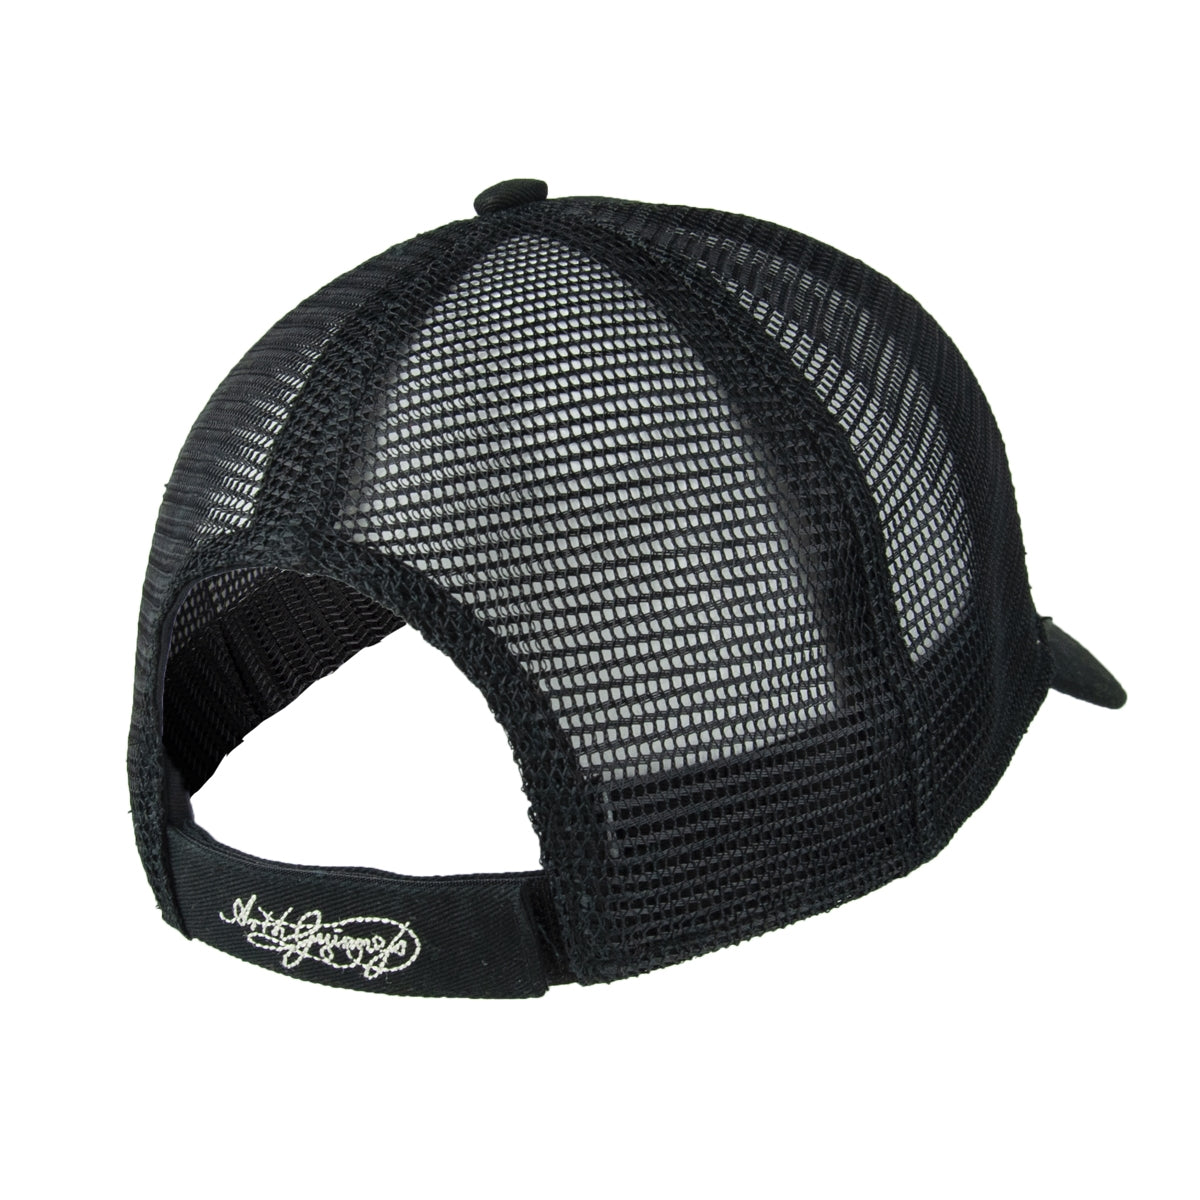 An adjustable Guinness Signature Black Trucker Mesh Baseball Cap with a Guinness logo on the back.